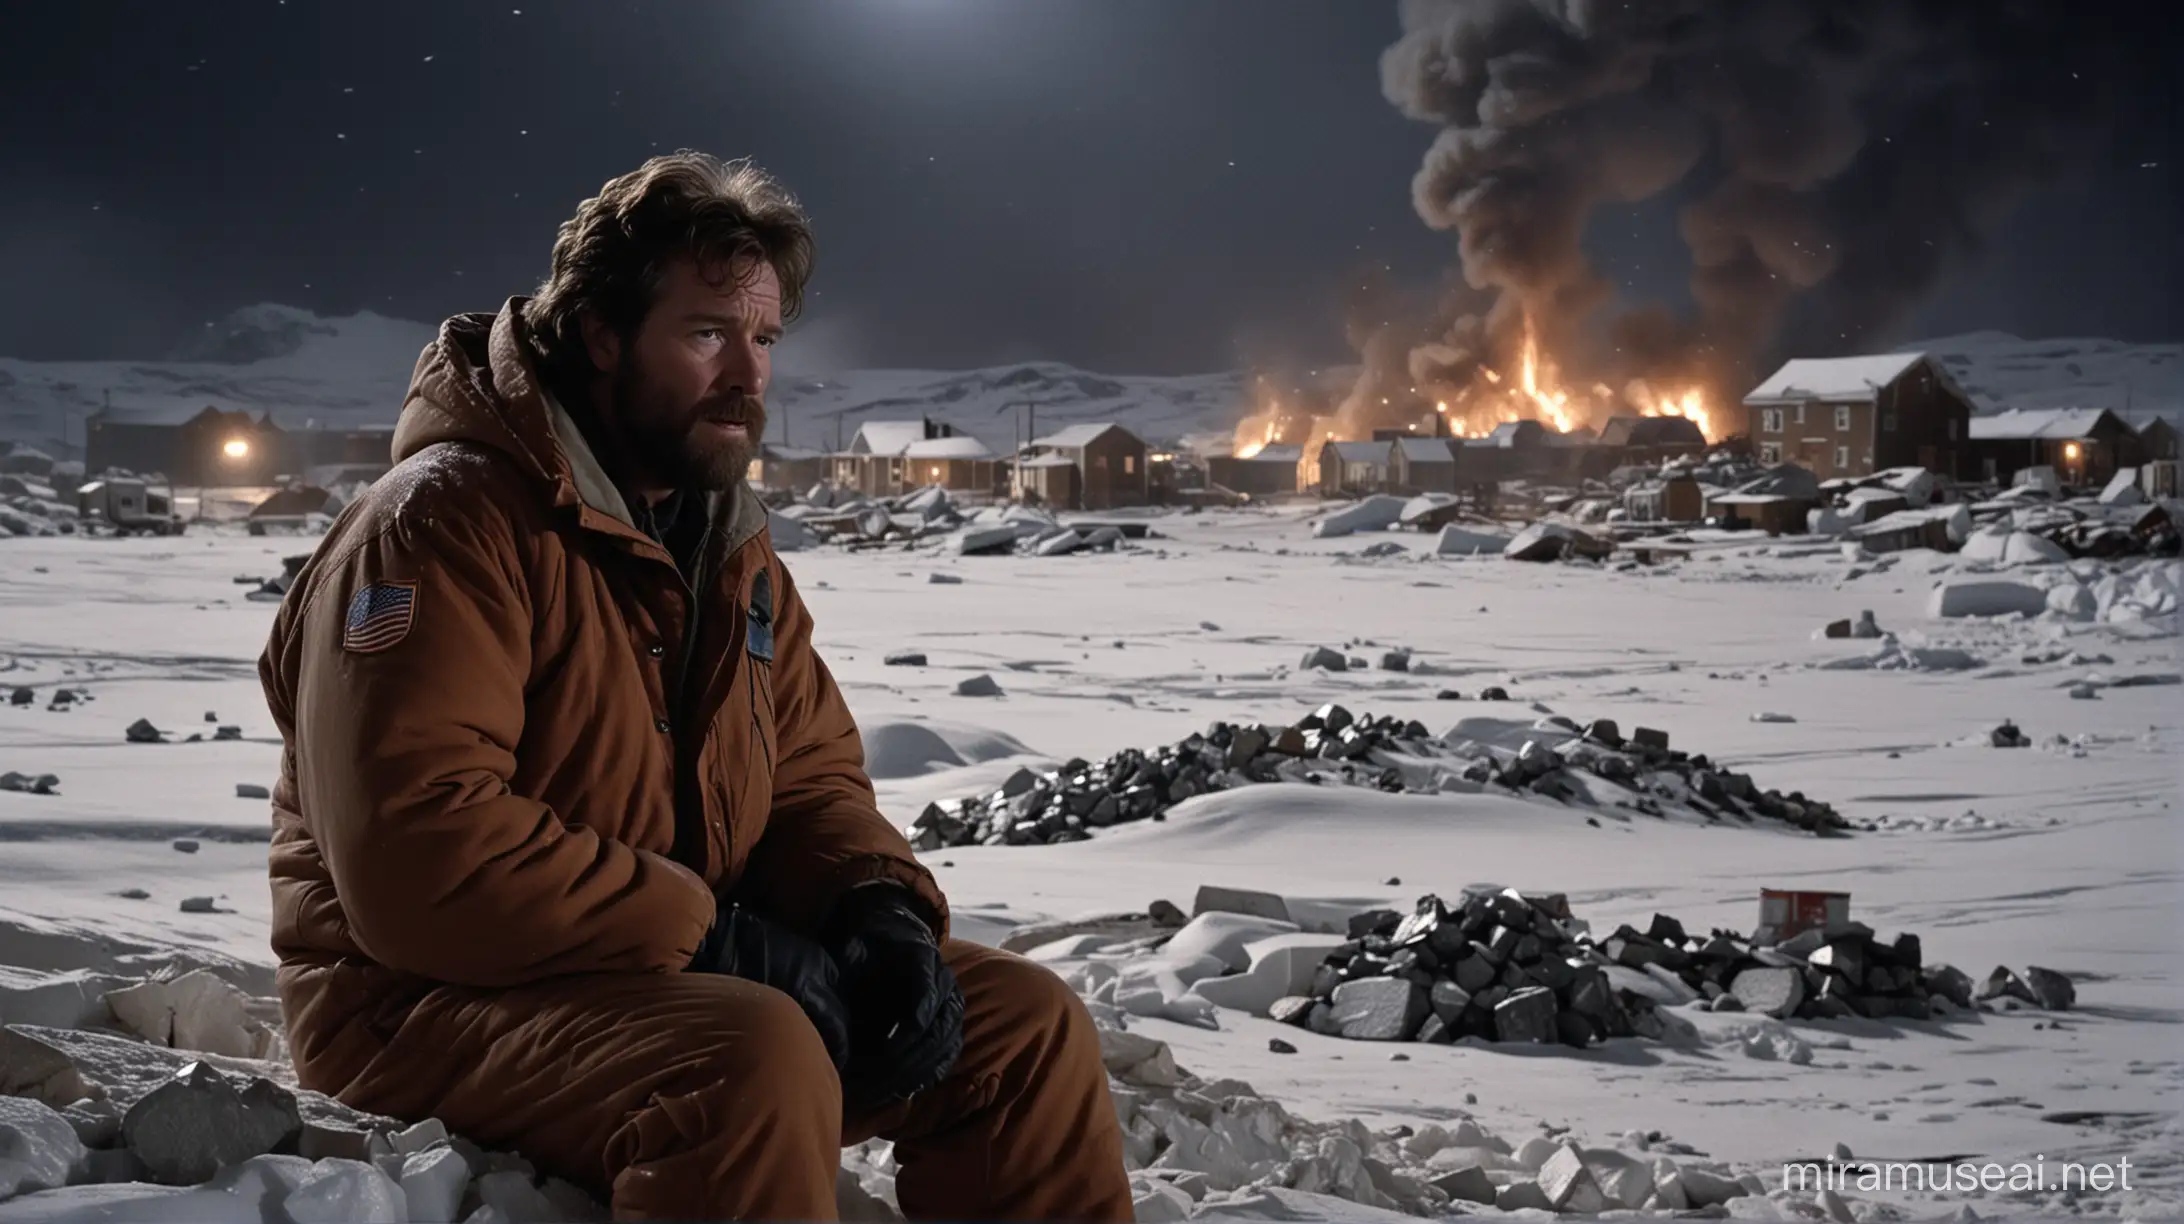 cinematic still, film by john carpenter, the thing, antarctica, night, buildings on fire in background, blizzard, kurt russell, beard, brown snowsuit, sitting against rubble, bottle in hand, black man in snowsuit, sitting facing each other, very dark